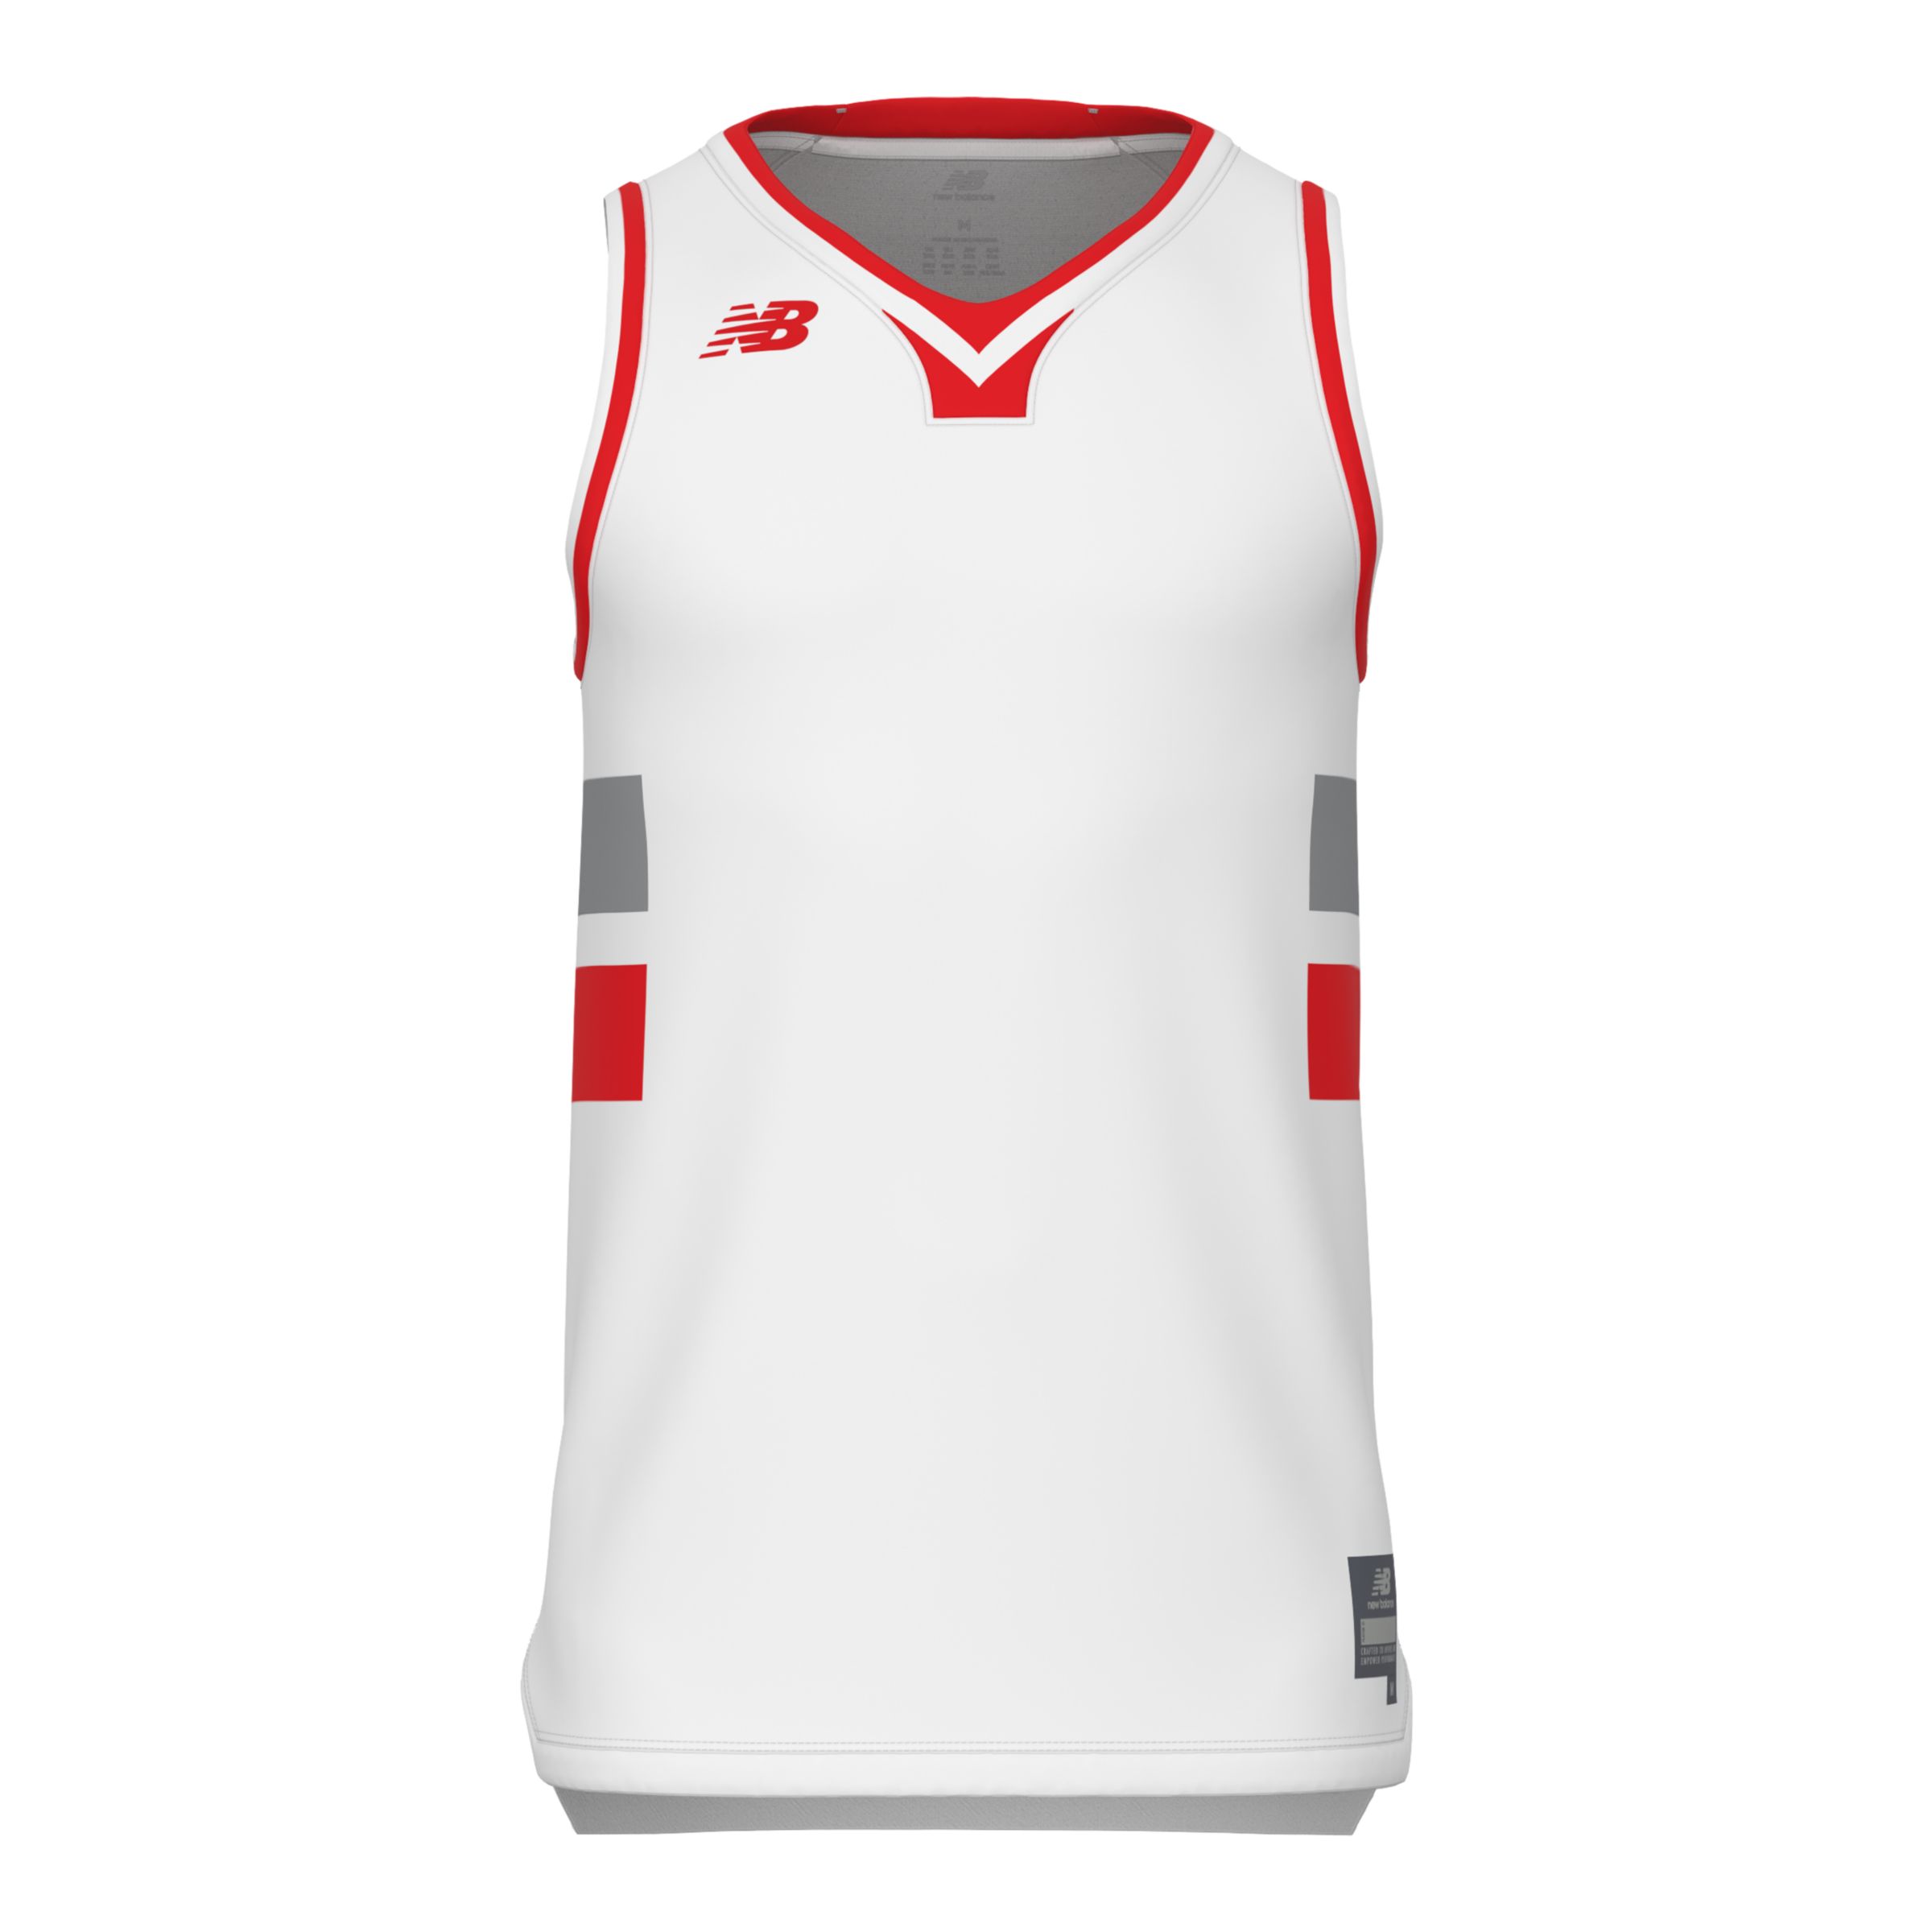 Source Customized reversible blank white and black basketball uniform jersey  on m.